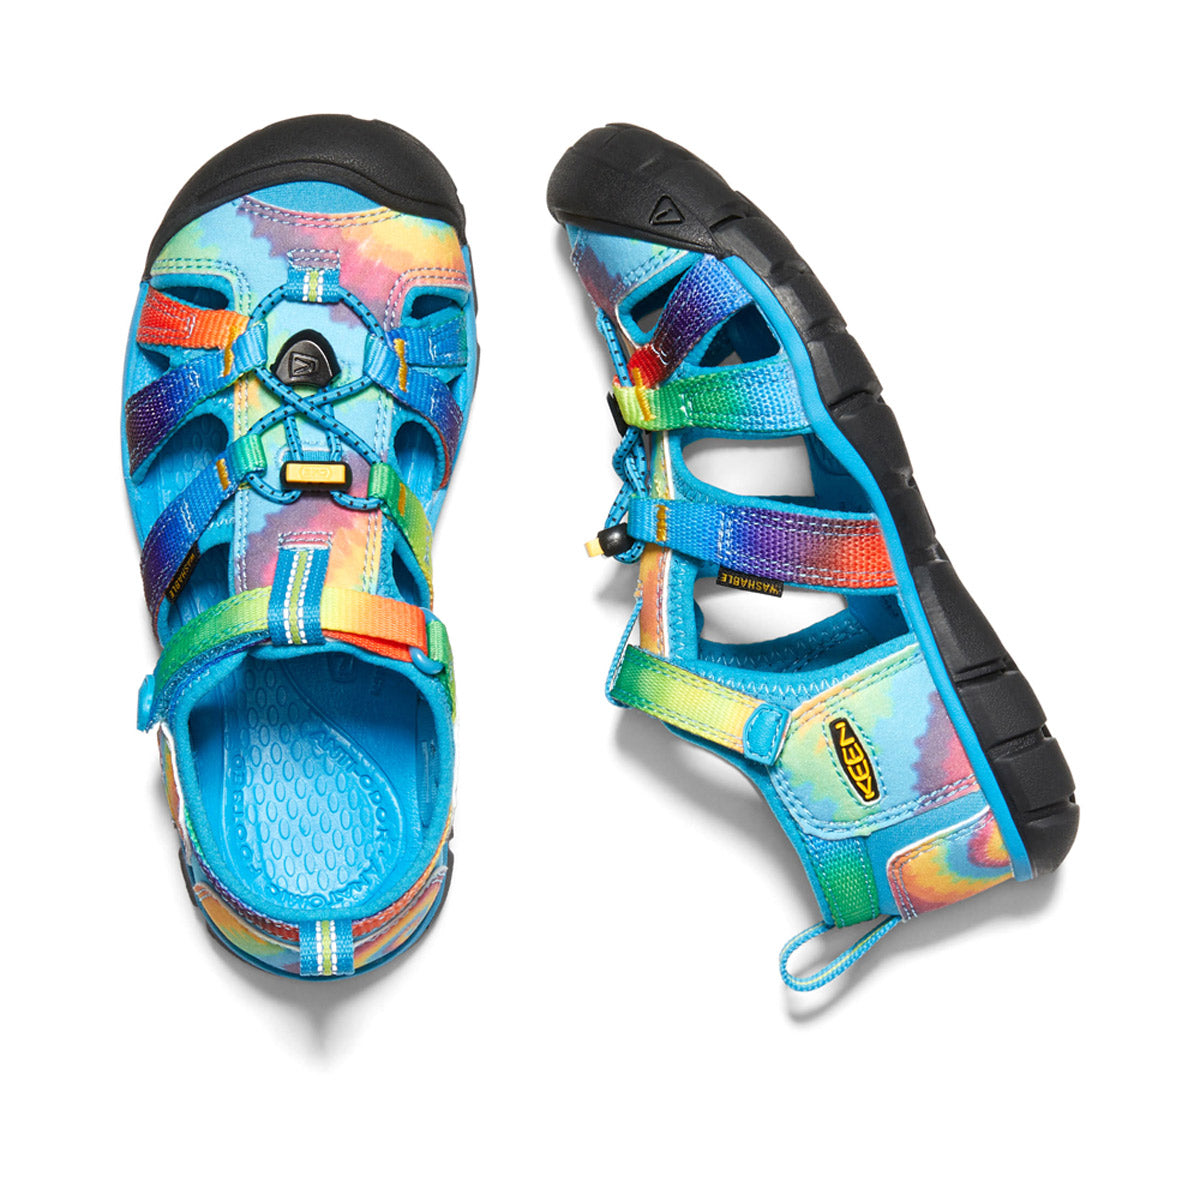 A pair of colorful Keen KEEN CHILD SEACAMP II CNX VIVID BLUE TIE DYE - KIDS hybrid water sandals viewed from above.